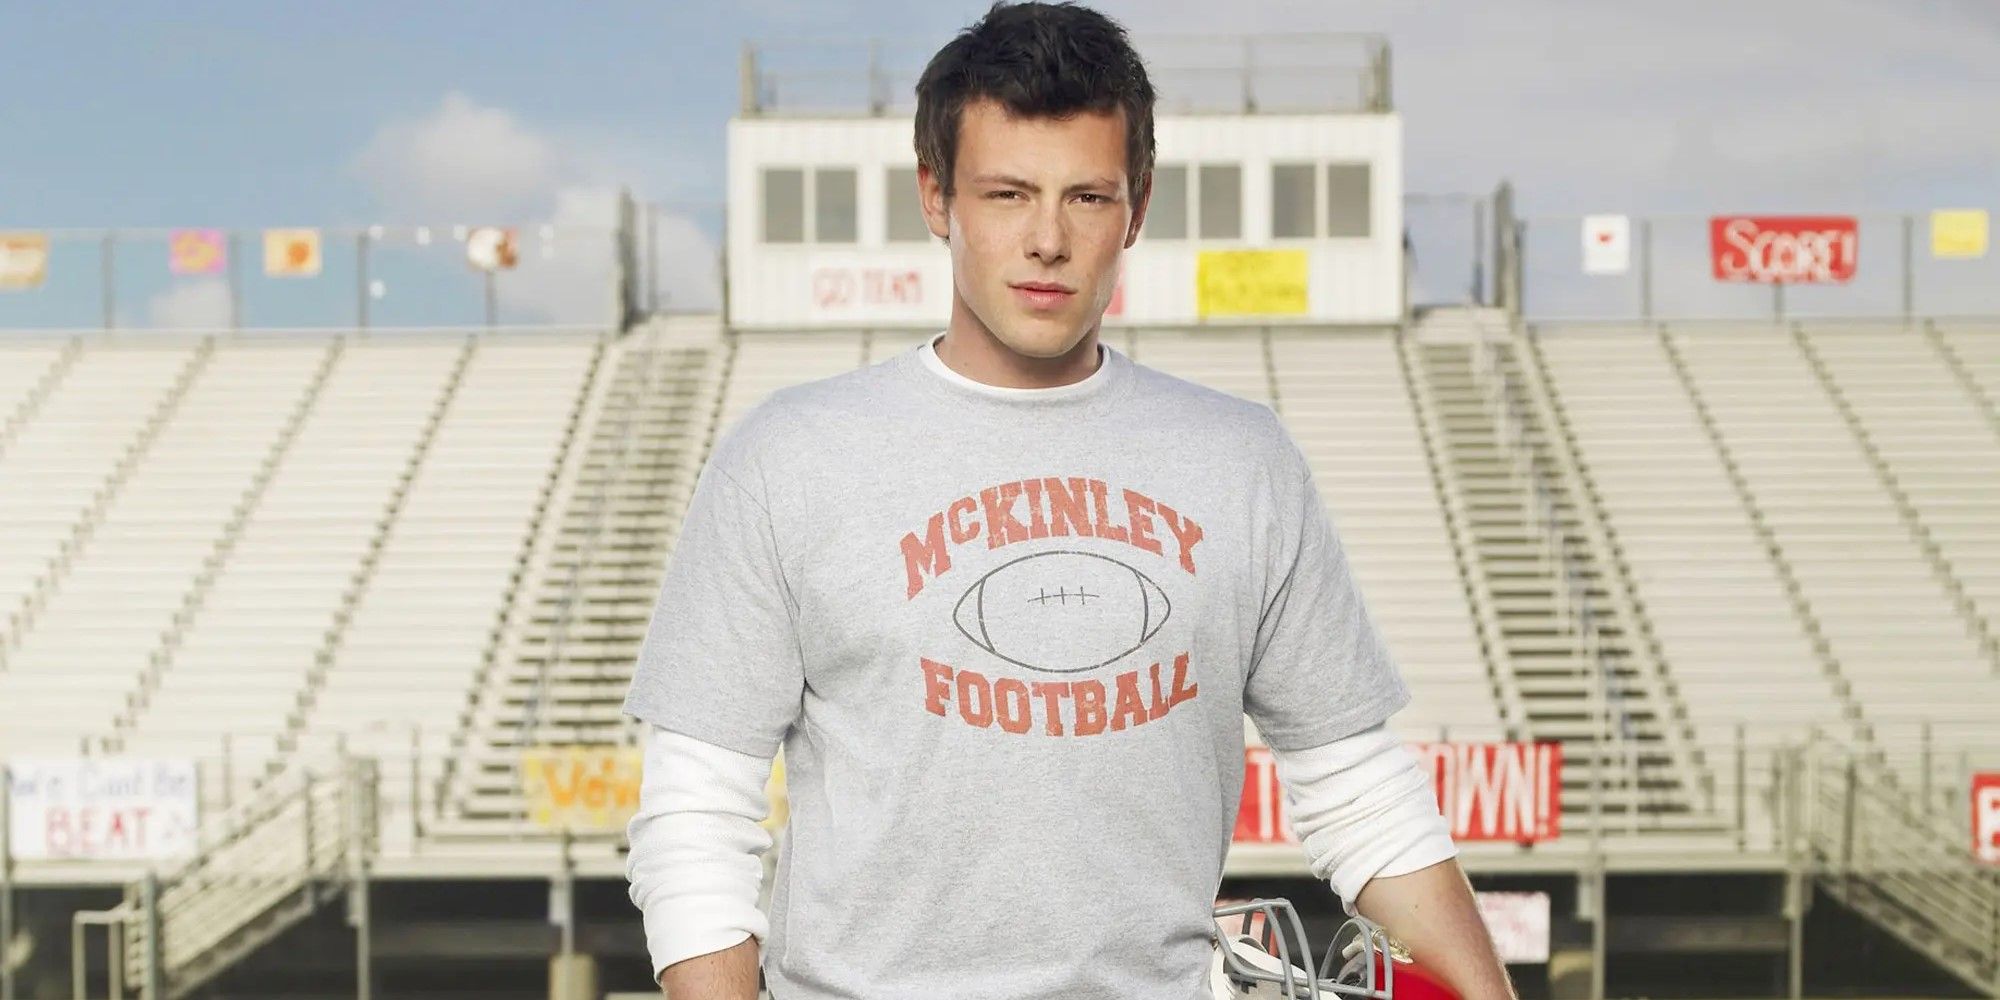 Cory Monteith as Finn Hudson in Glee promotional image.